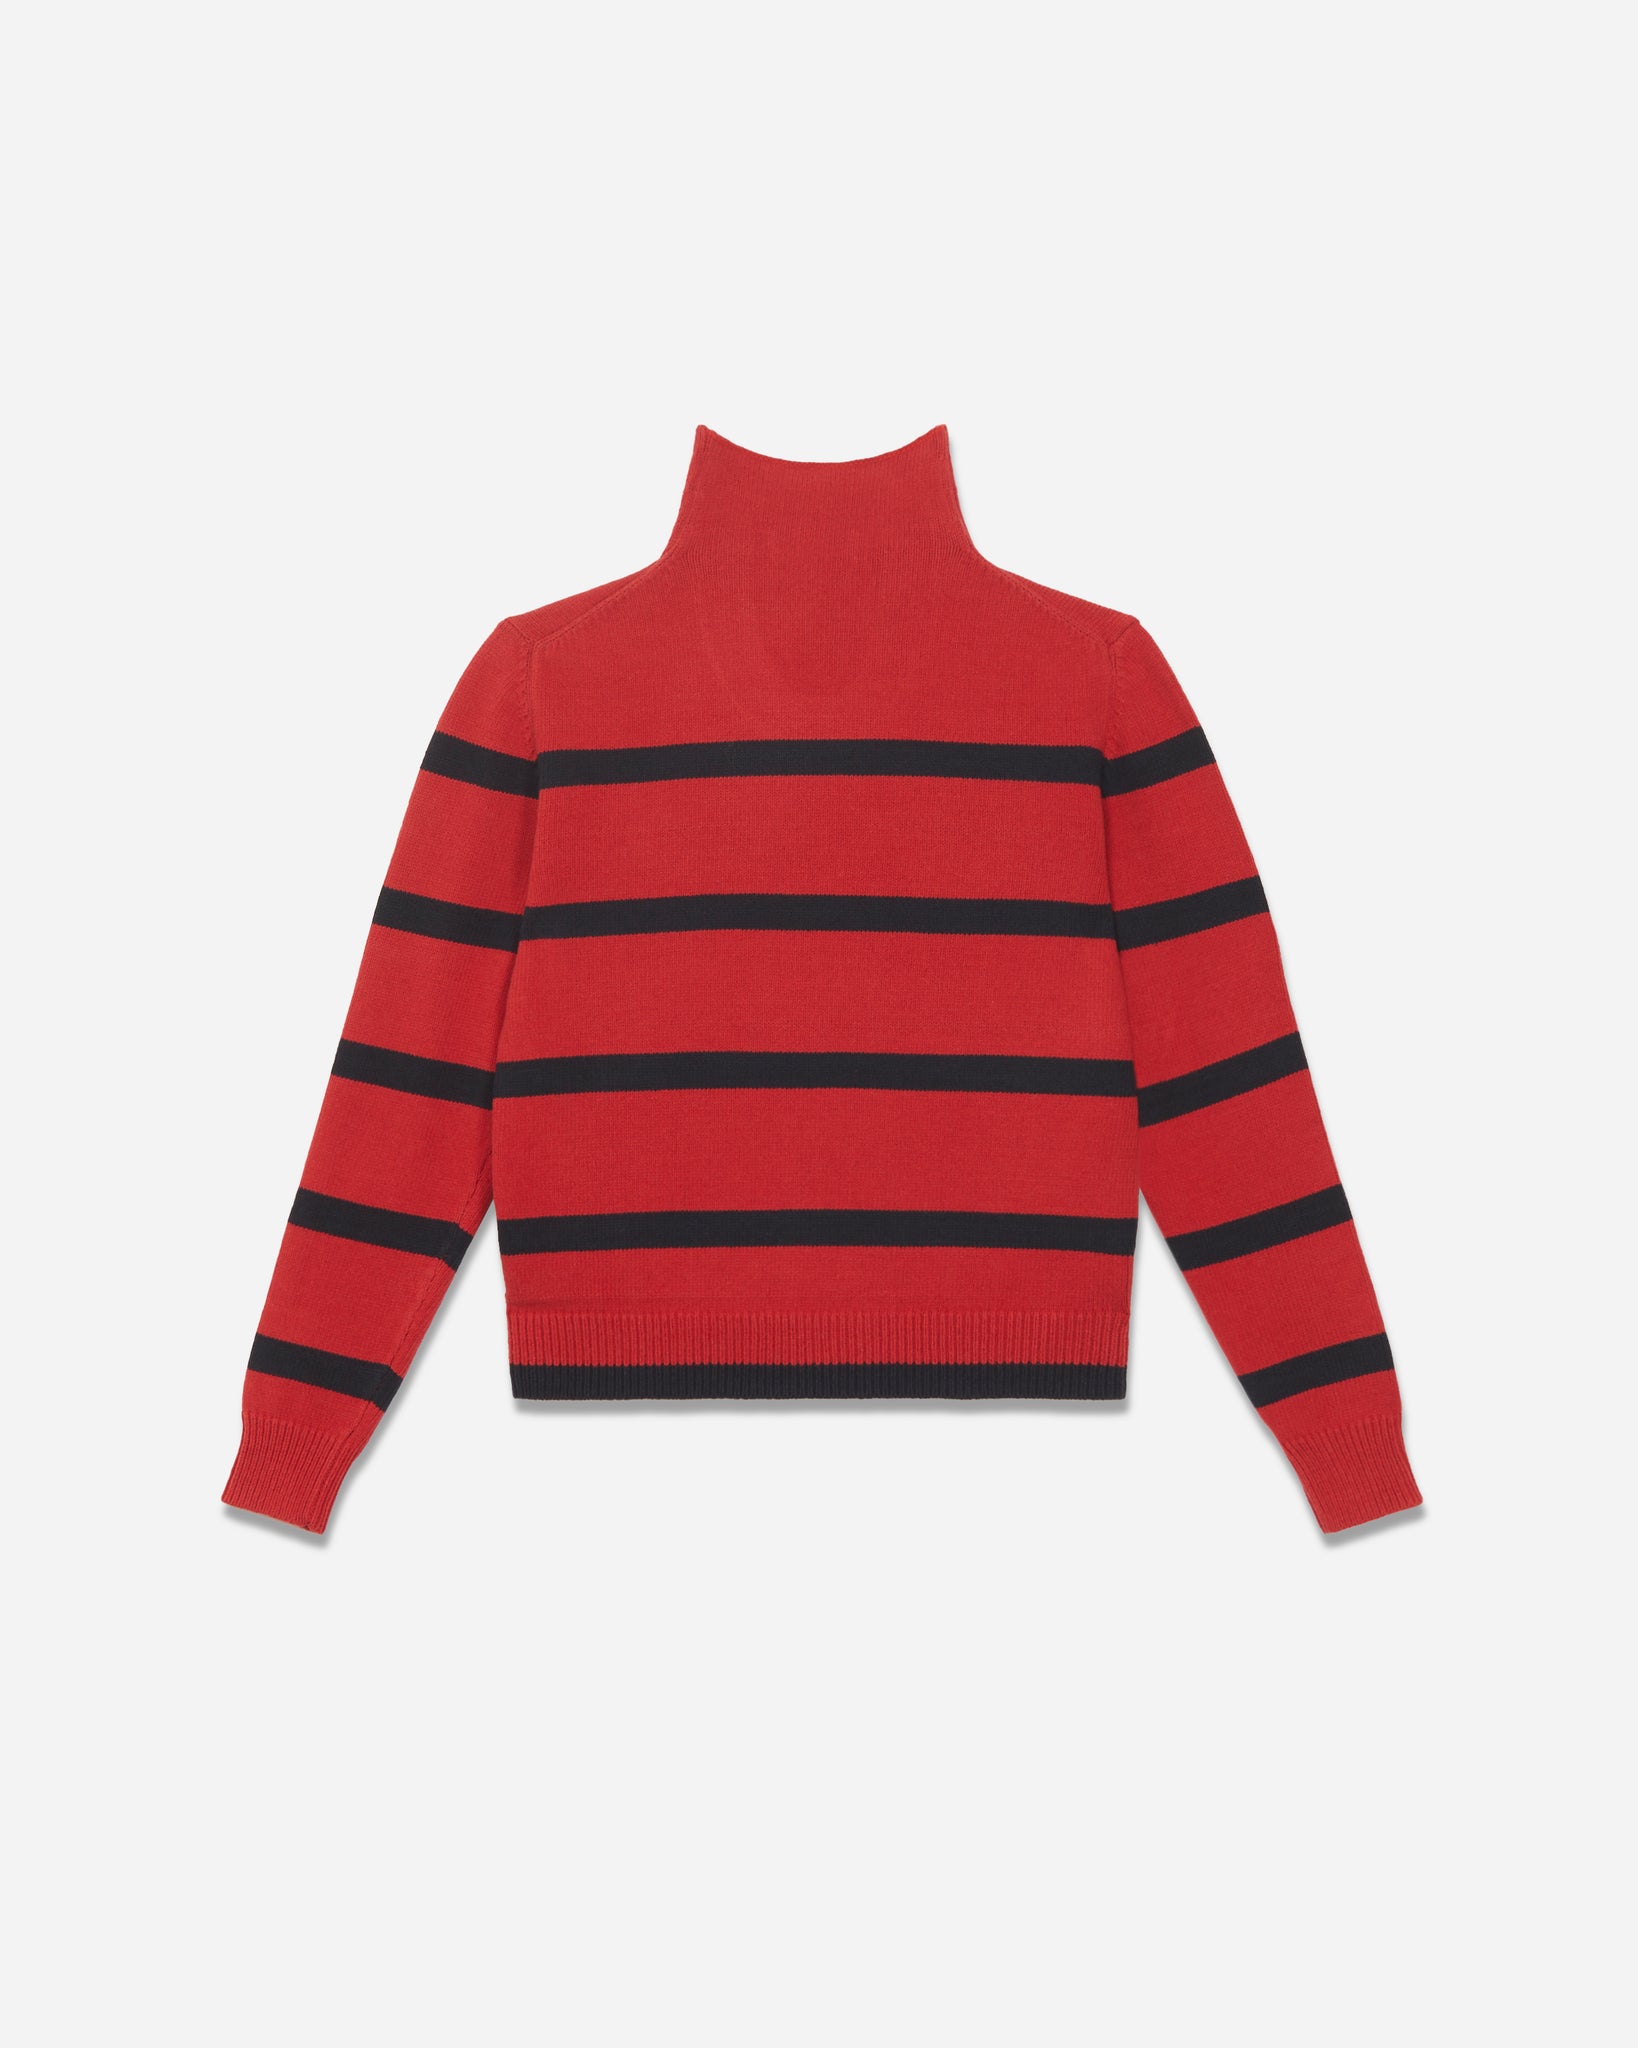 IRENE U-UP COTTON CASHMERE PULLOVER IN RED NAVY NAUTICAL STRIPE